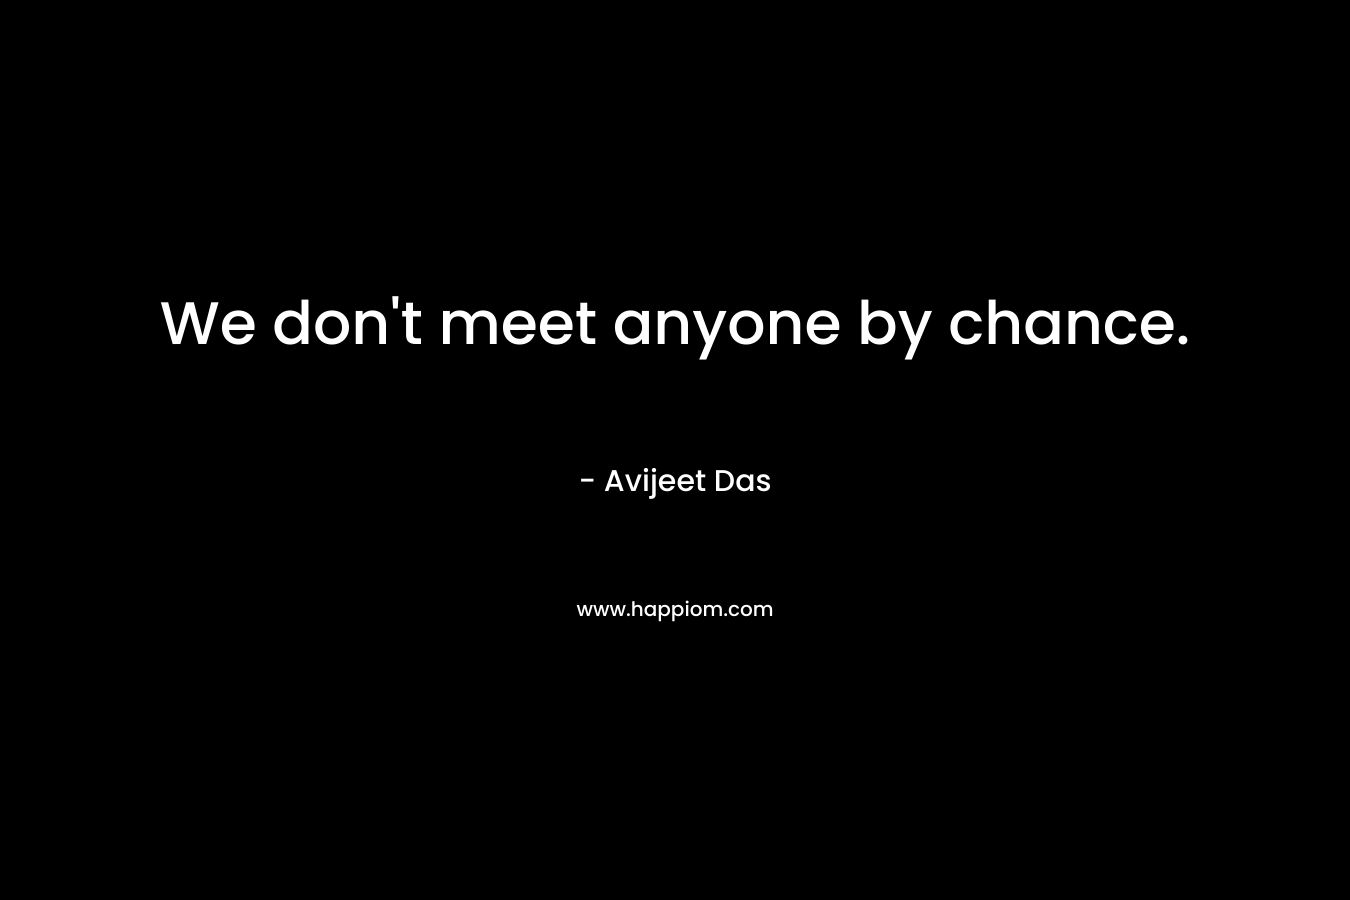 We don't meet anyone by chance.